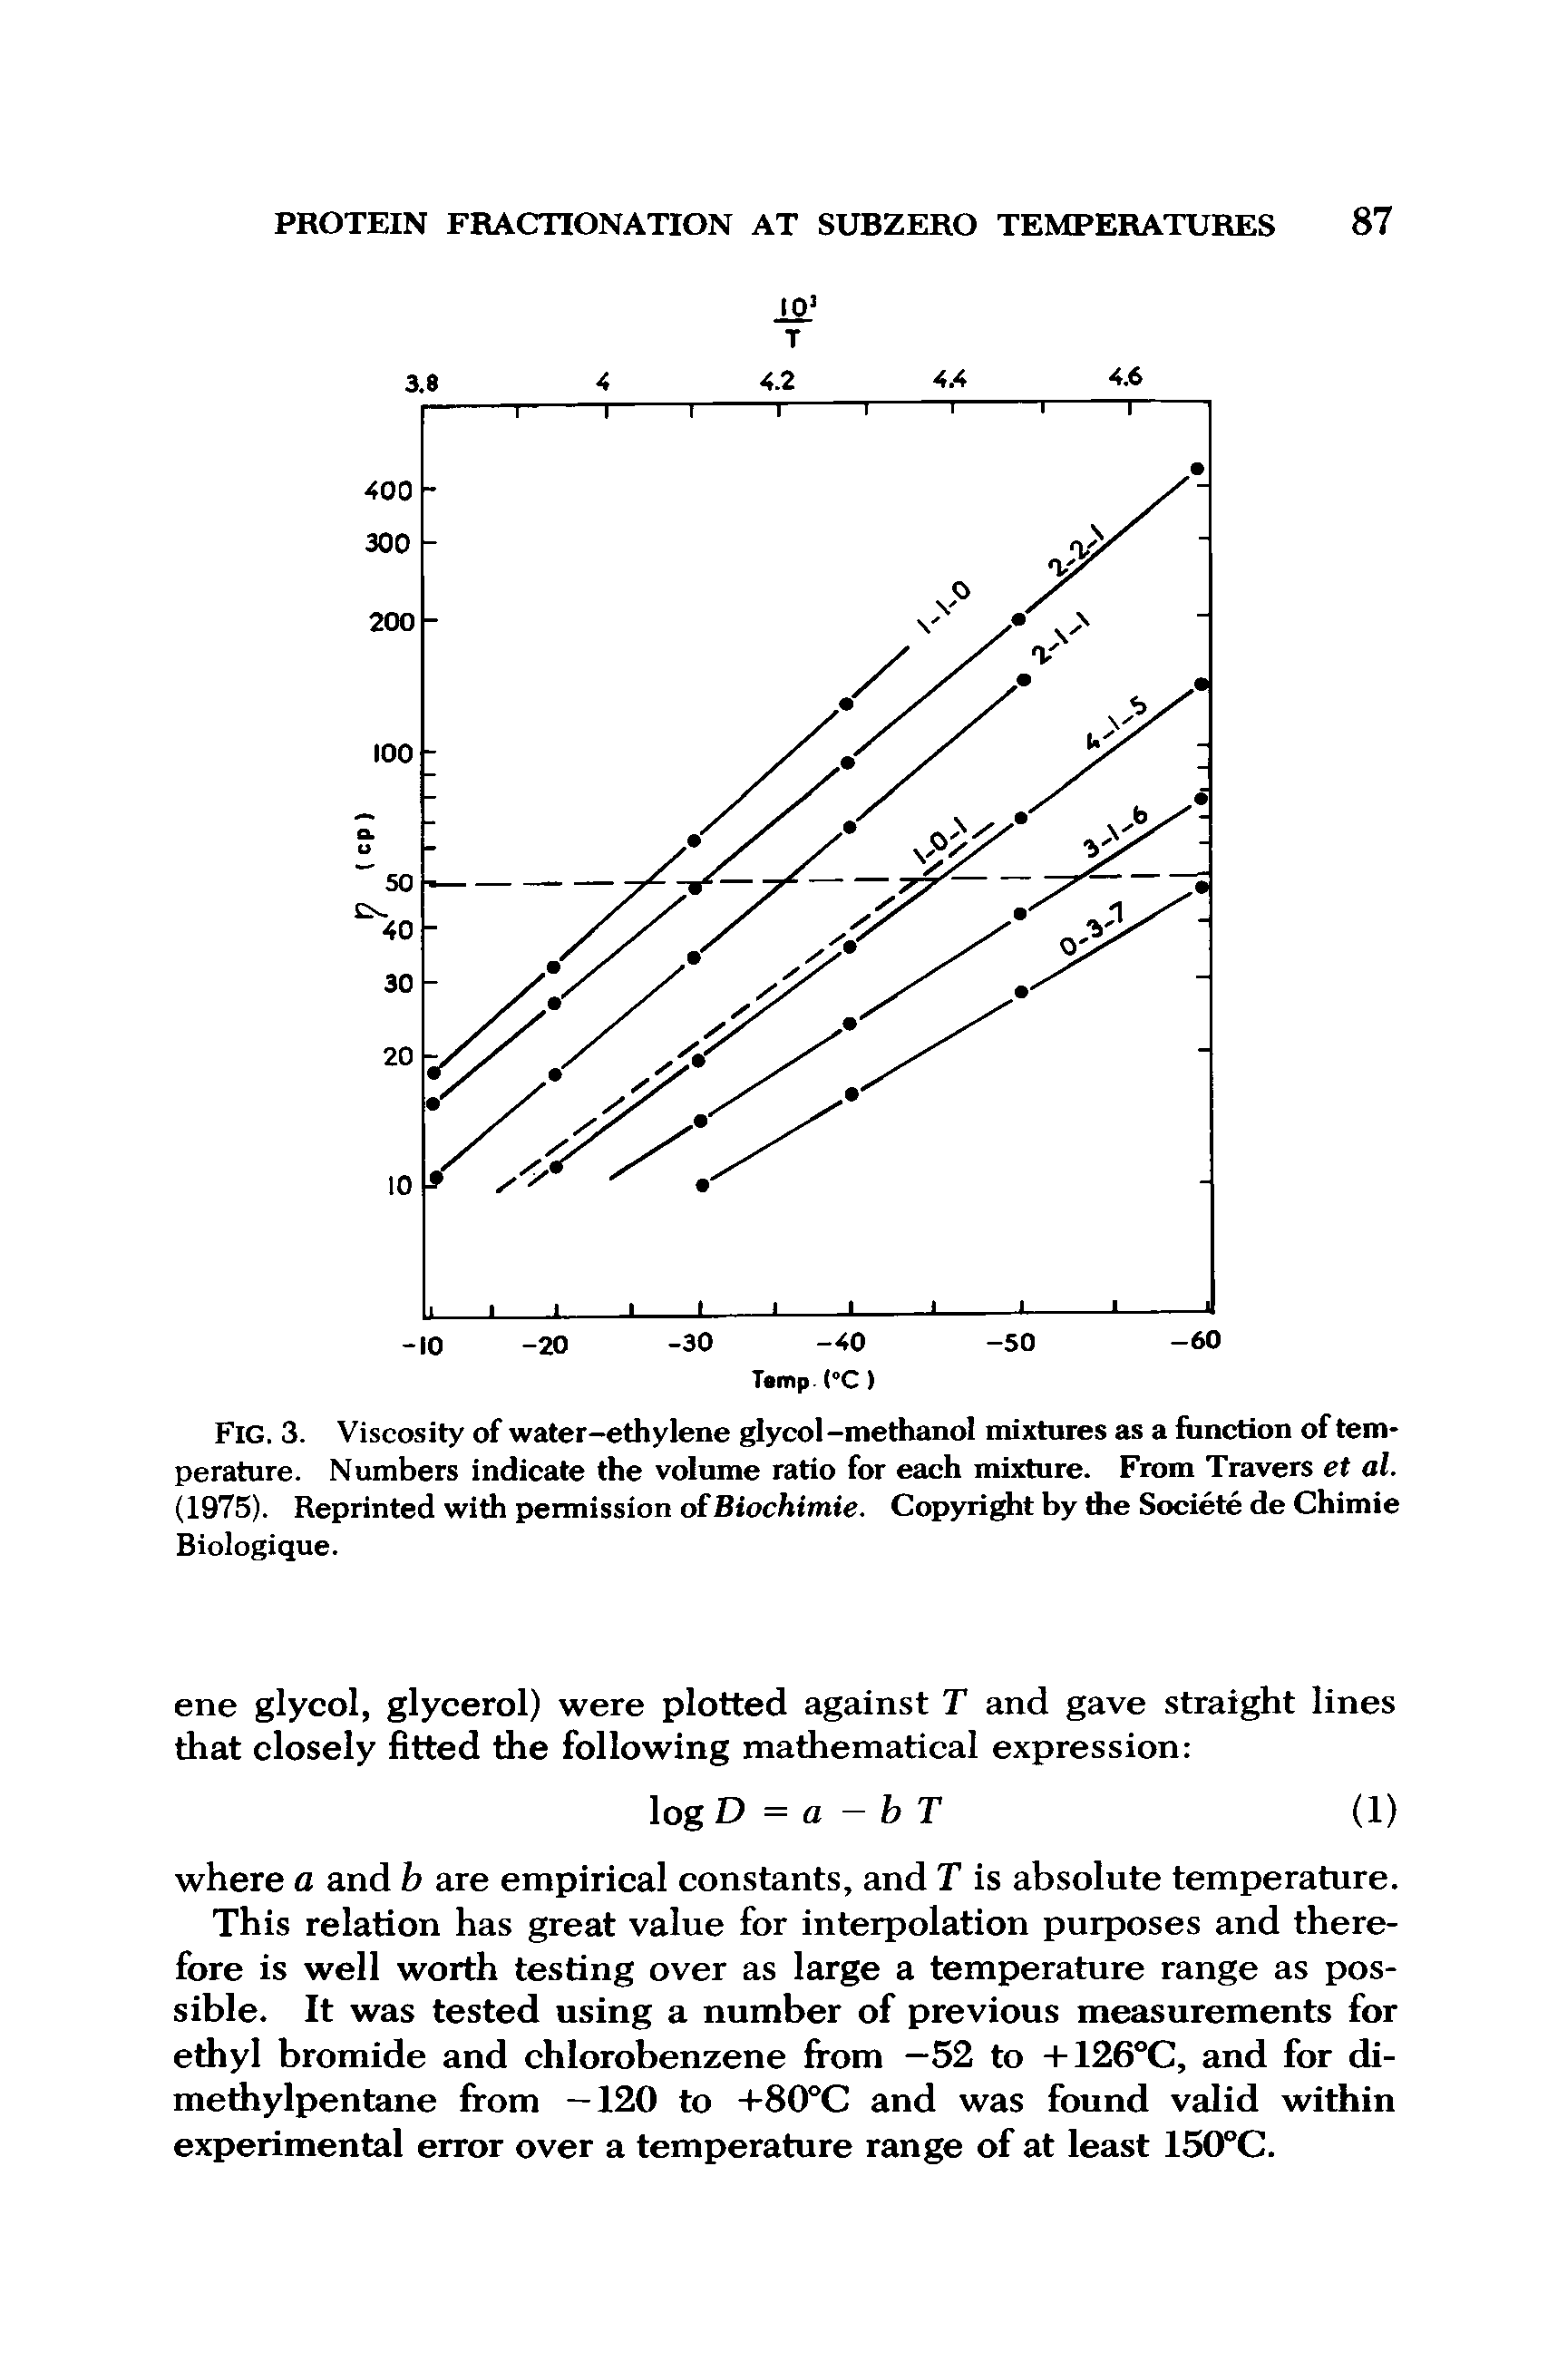 Fig. 3. Viscosity of water-ethylene glycol-methanol mixtures as a function of temperature. Numbers indicate the volume ratio for each mixture. From Travers et al. (1975). Reprinted with permission of Biochimie. Copyright by die Societe de Chimie Biologique.